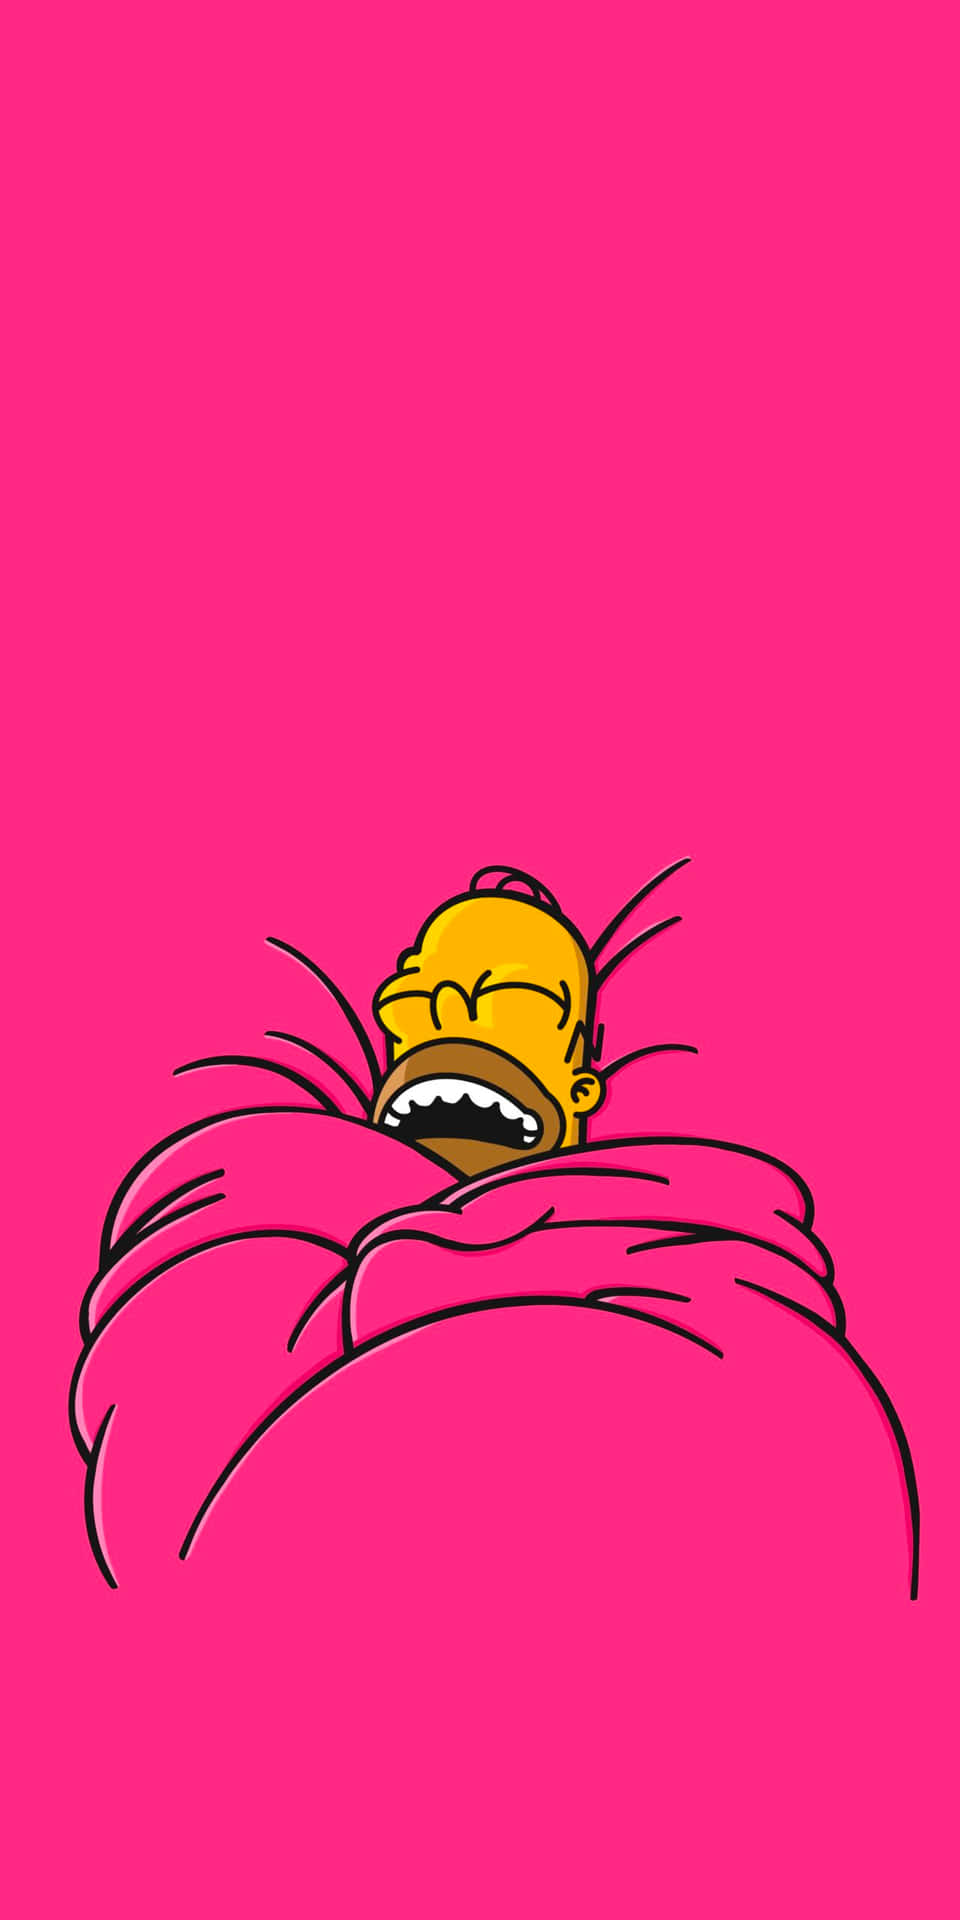 Relive the glory days of Springfield with Homer Simpson